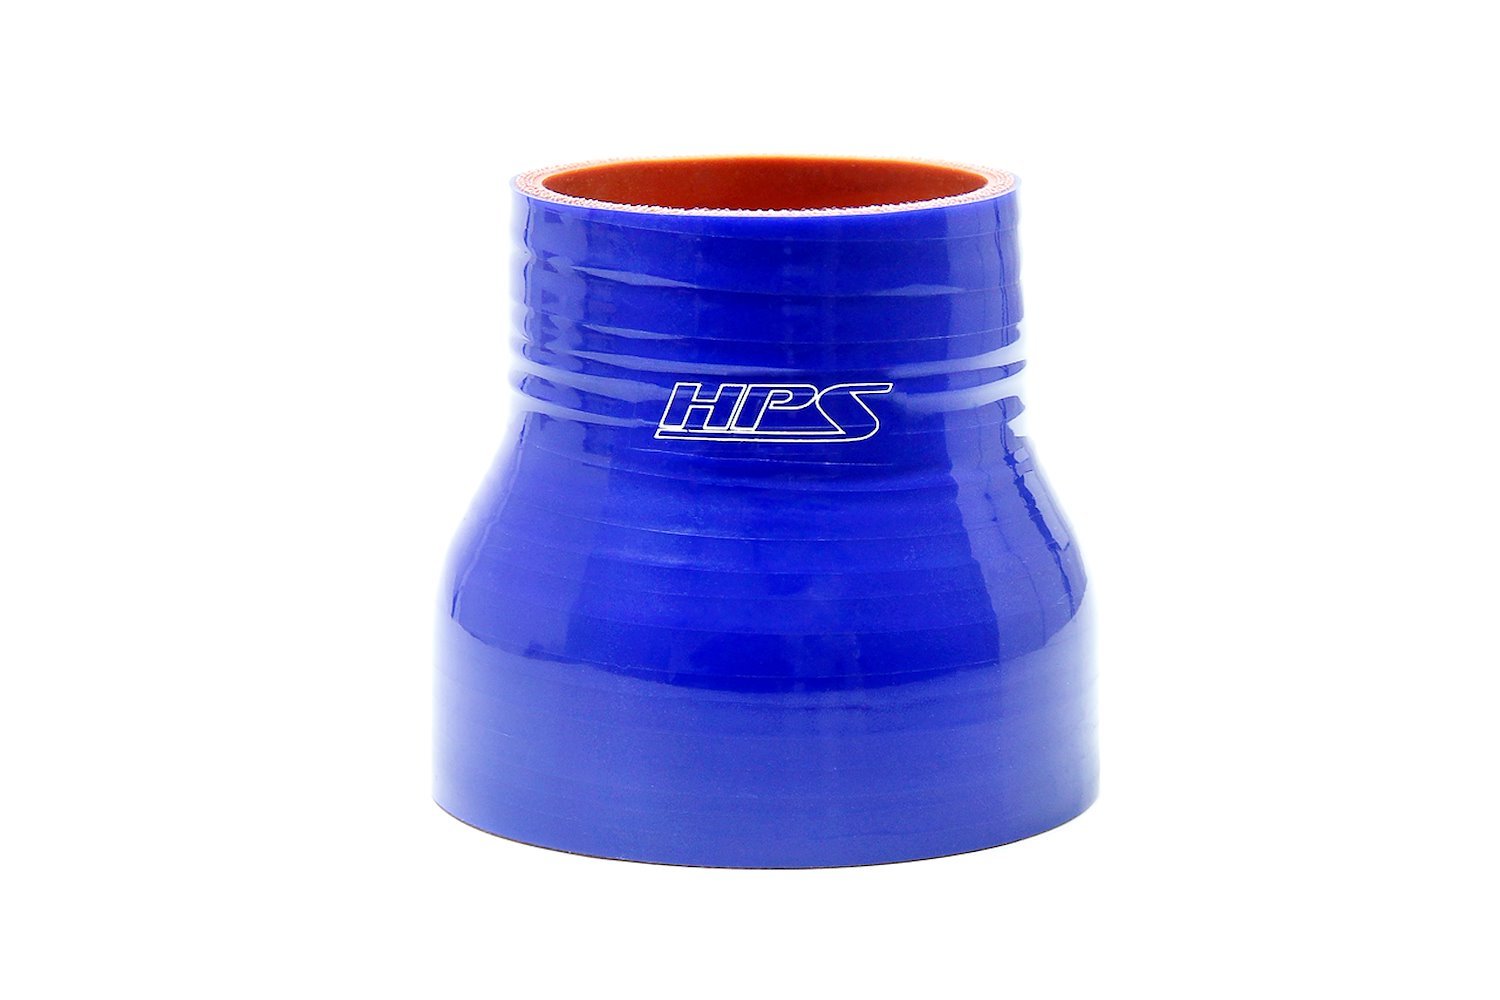 HTSR-175-225-BLUE Silicone Reducer Hose, High-Temp 4-Ply Reinforced, 1-3/4 in. - 2-1/4 in. ID, 3 in. Long, Blue